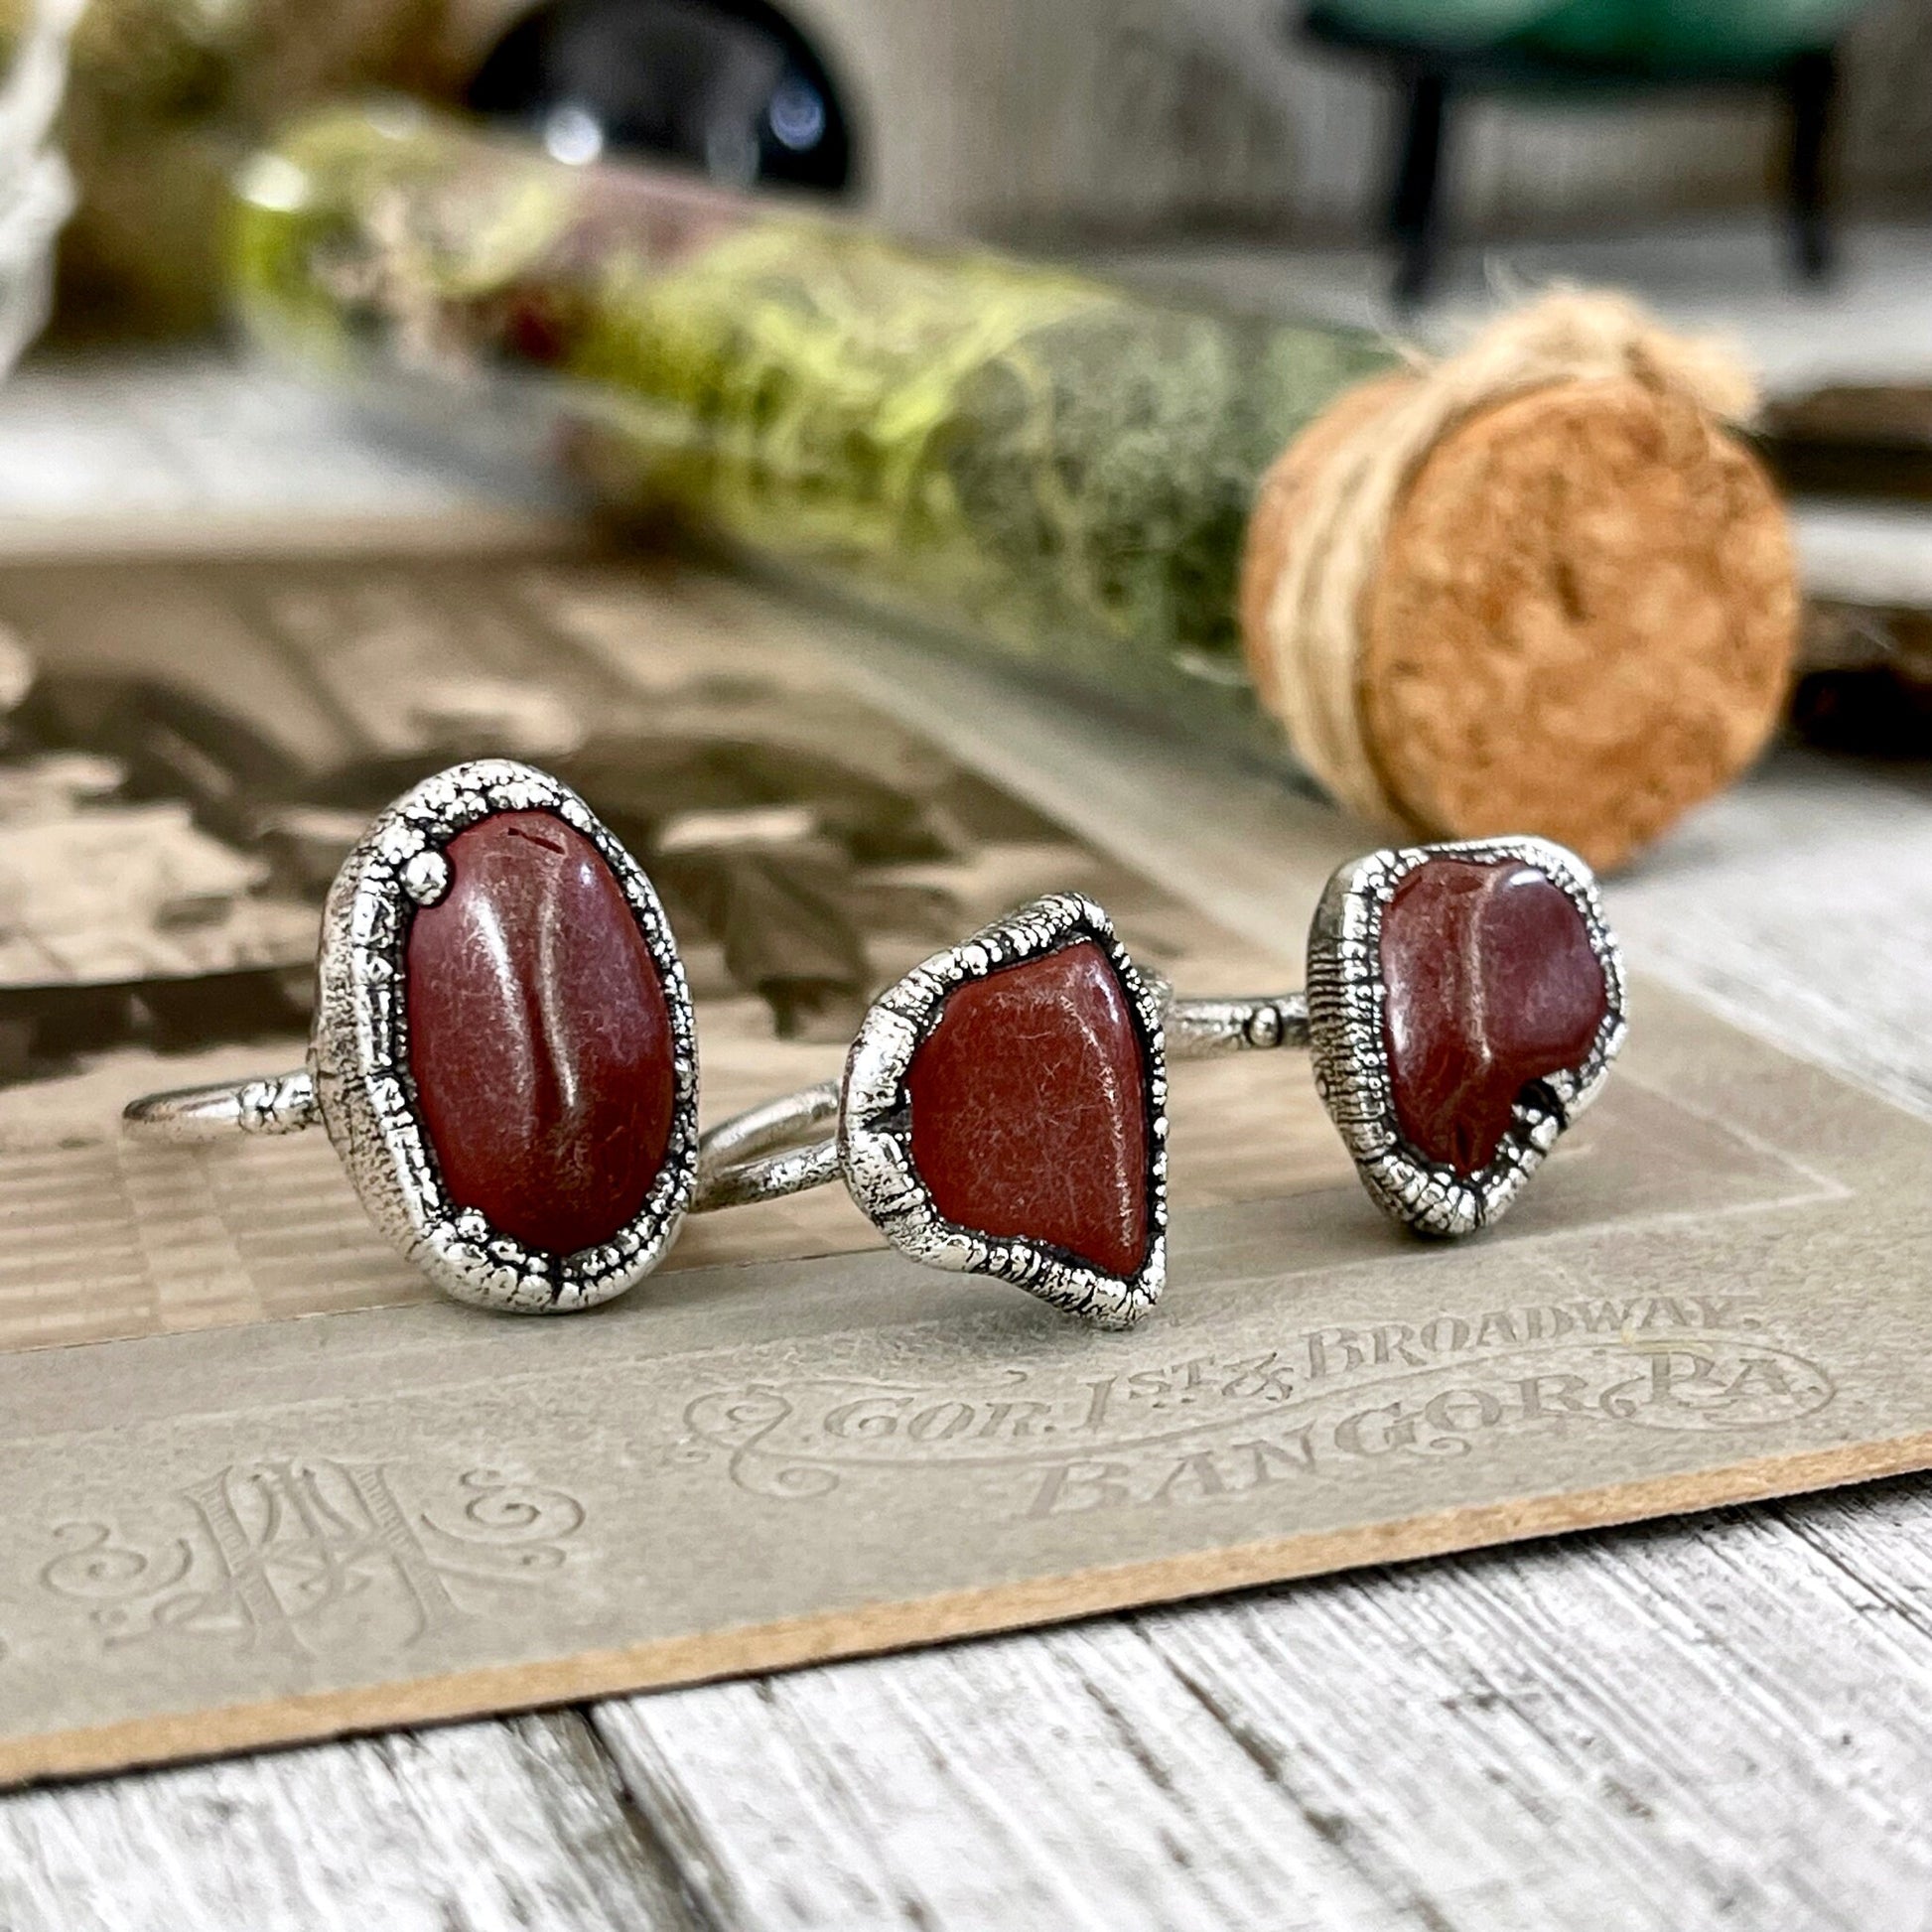 Natural Red Jasper Small Stone Ring in Fine Silver Size 5 6 7 8 9 10 / Foxlark Collection